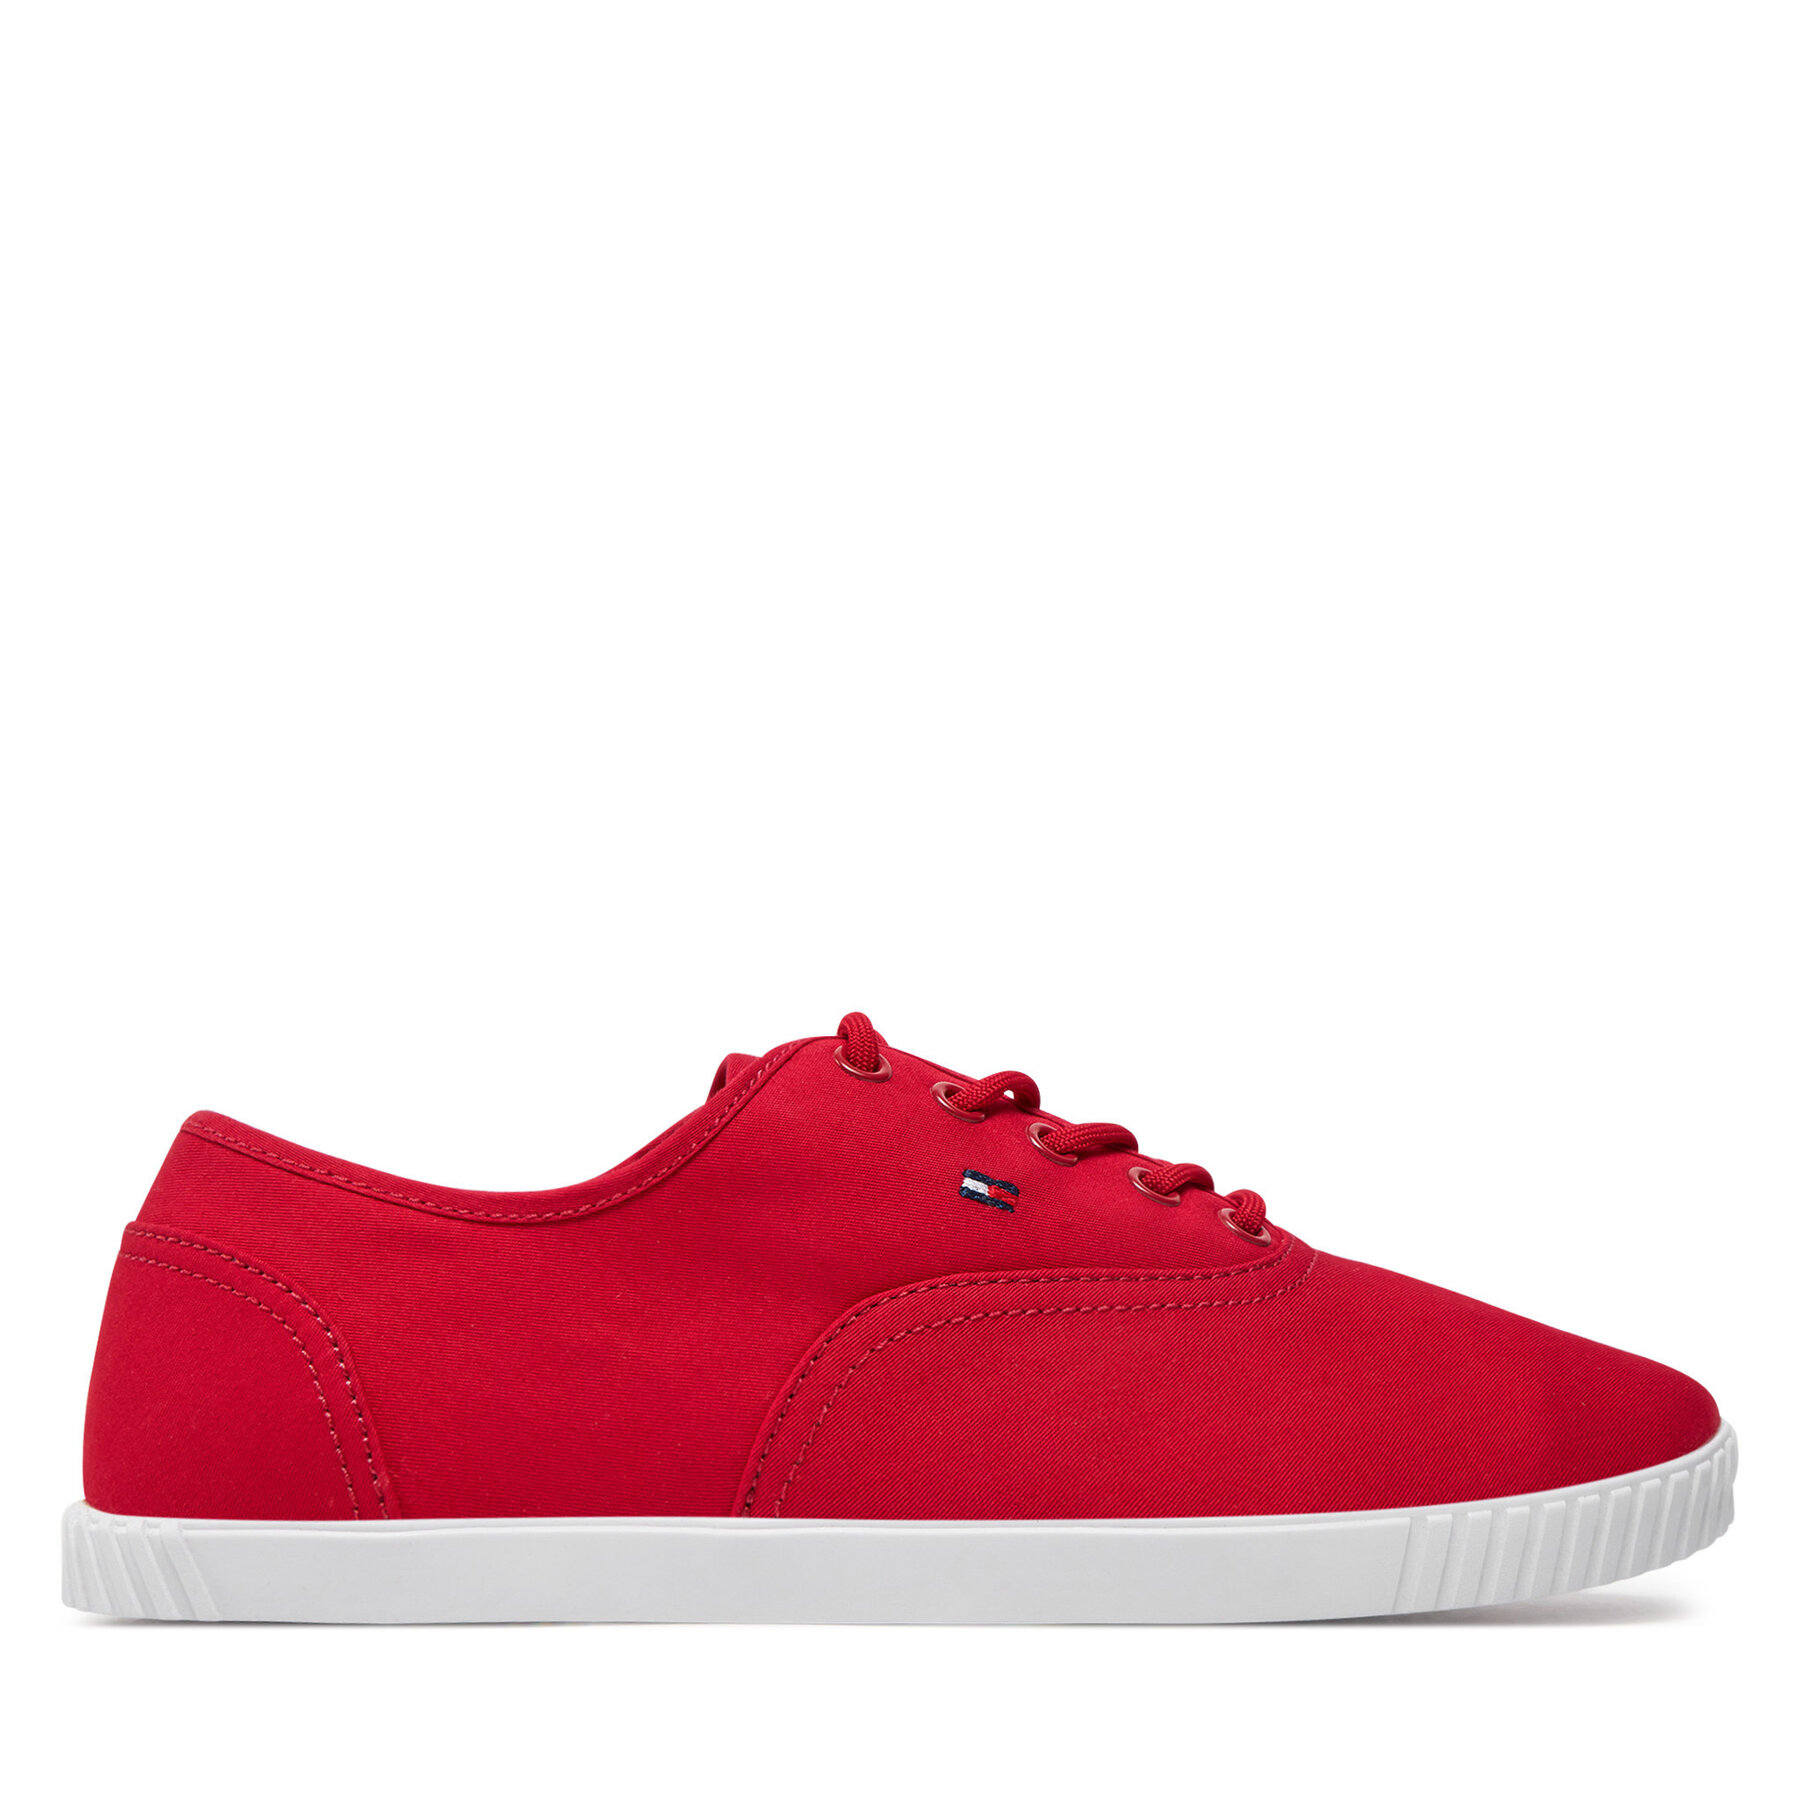 Sneakers aus Stoff Tommy Hilfiger Canvas Lace Up Sneaker FW0FW07805 Rot von Tommy Hilfiger